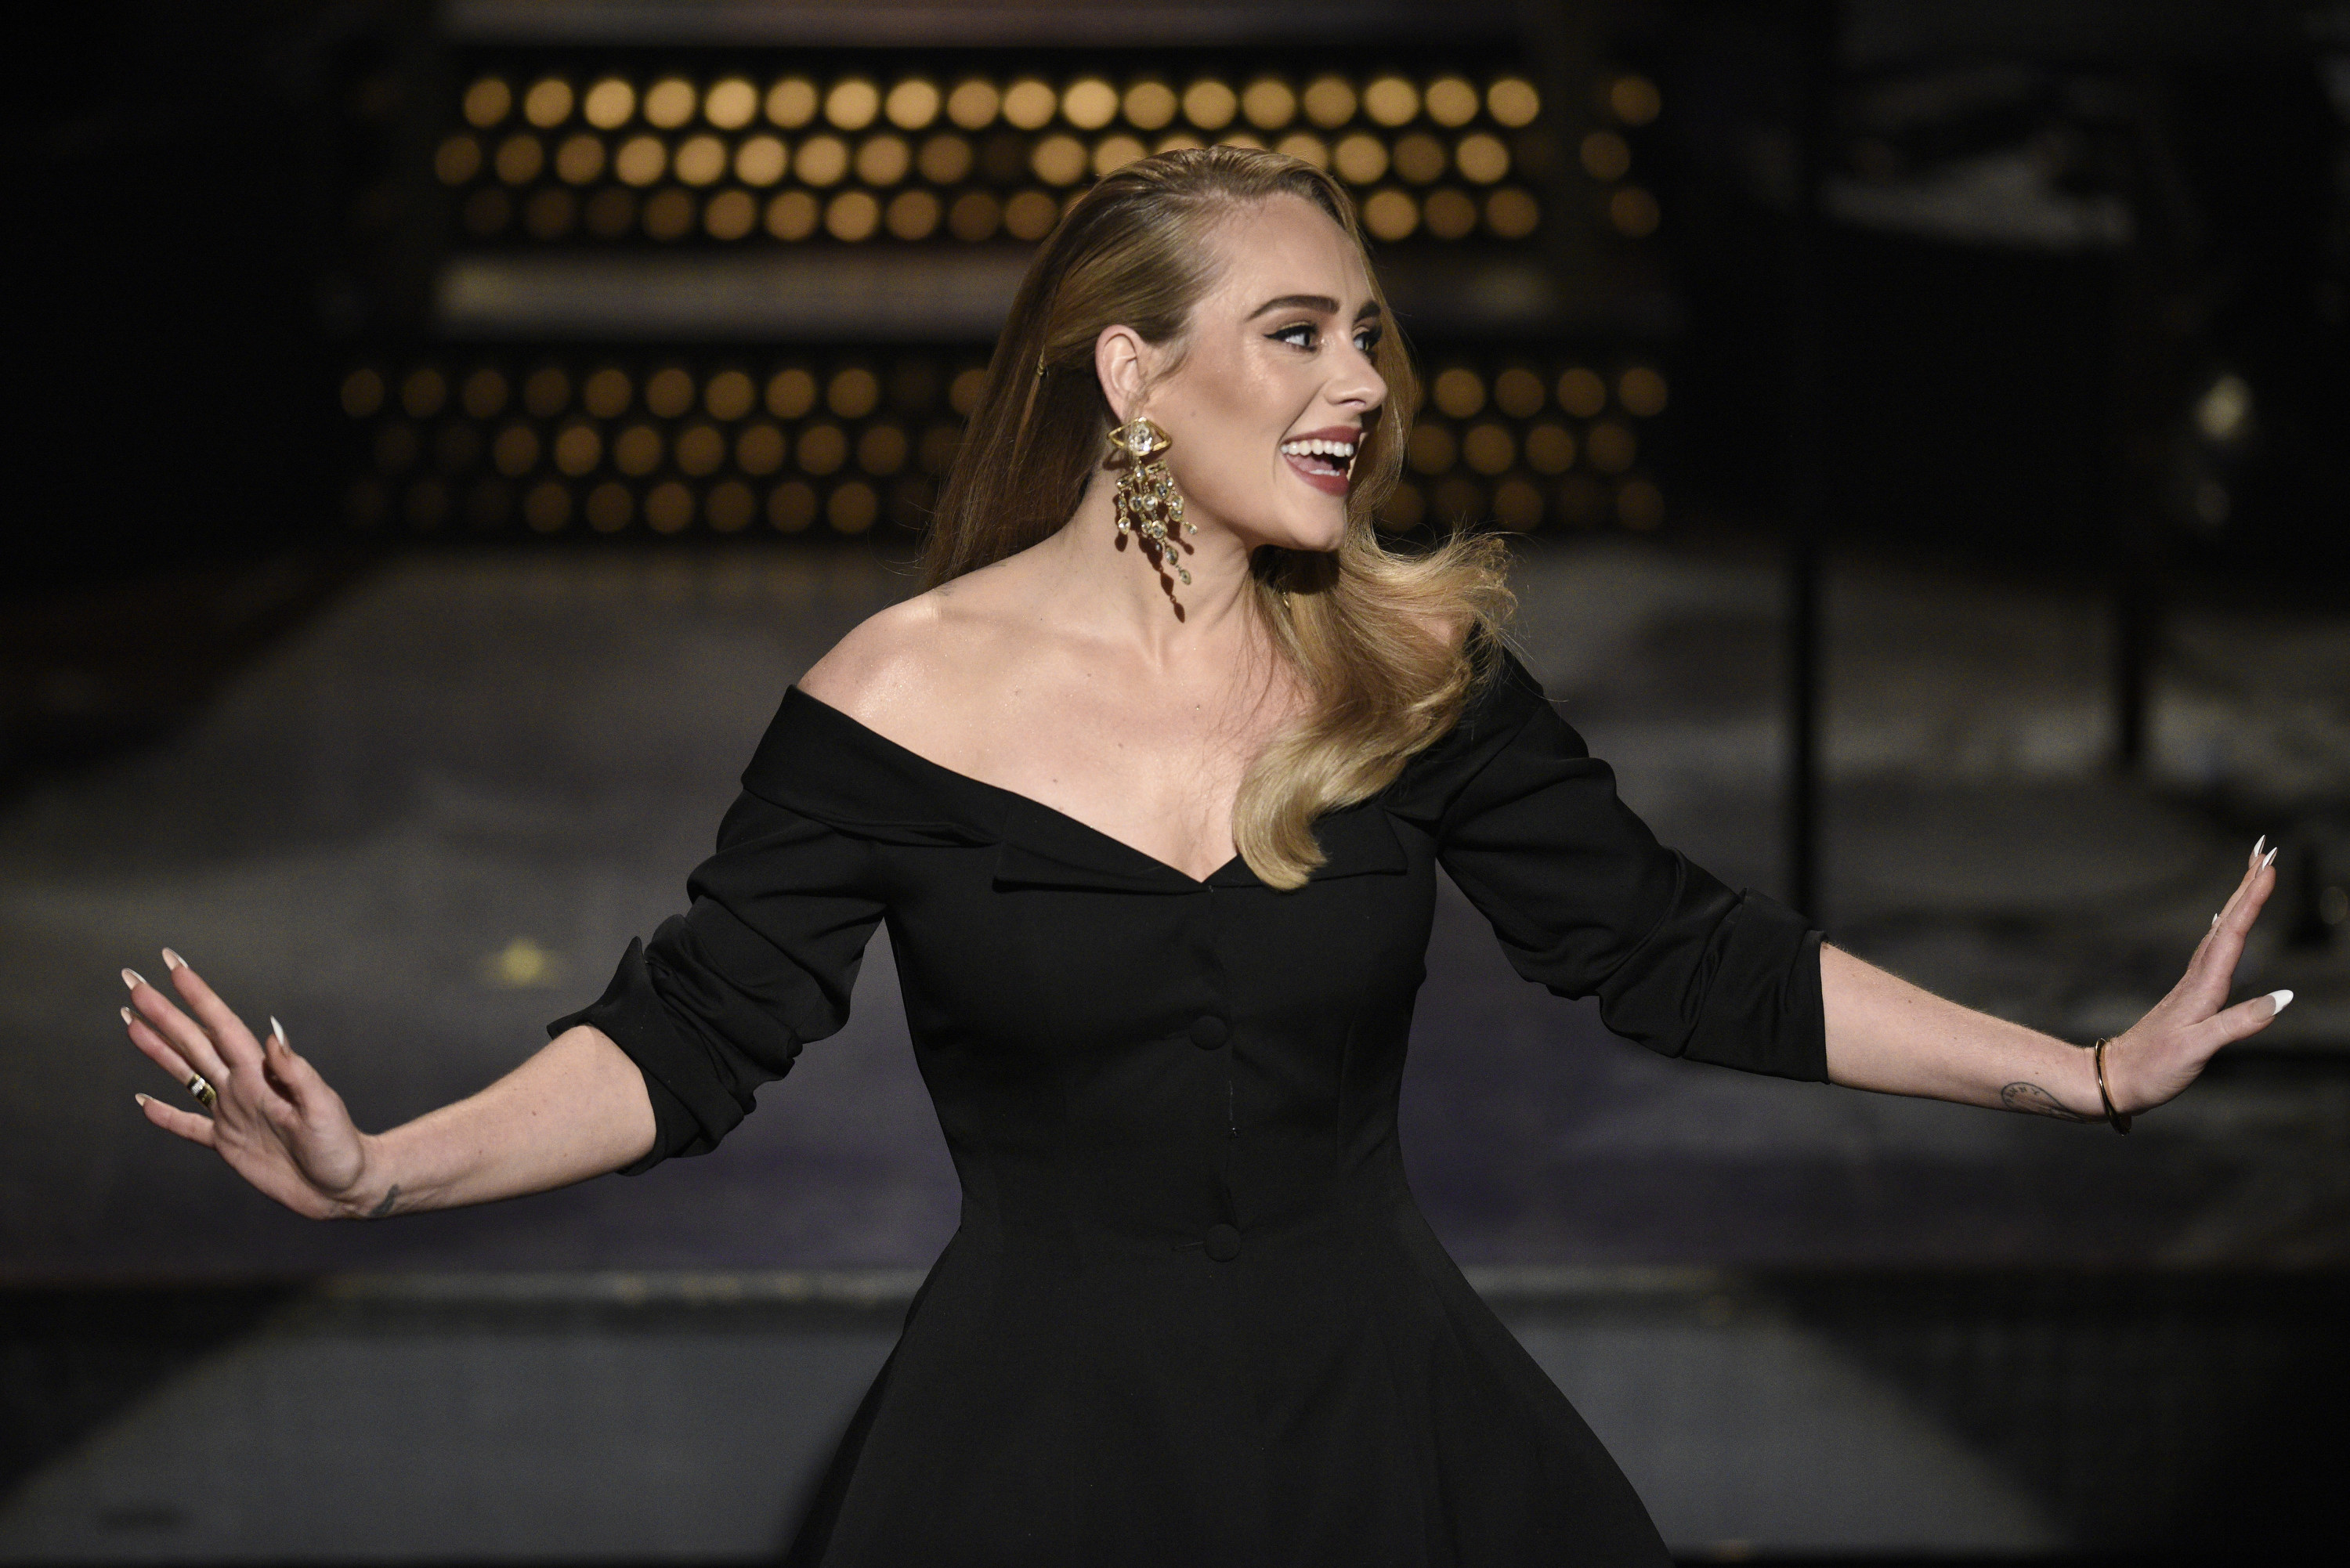 Adele smiles while holding her hands out on stage